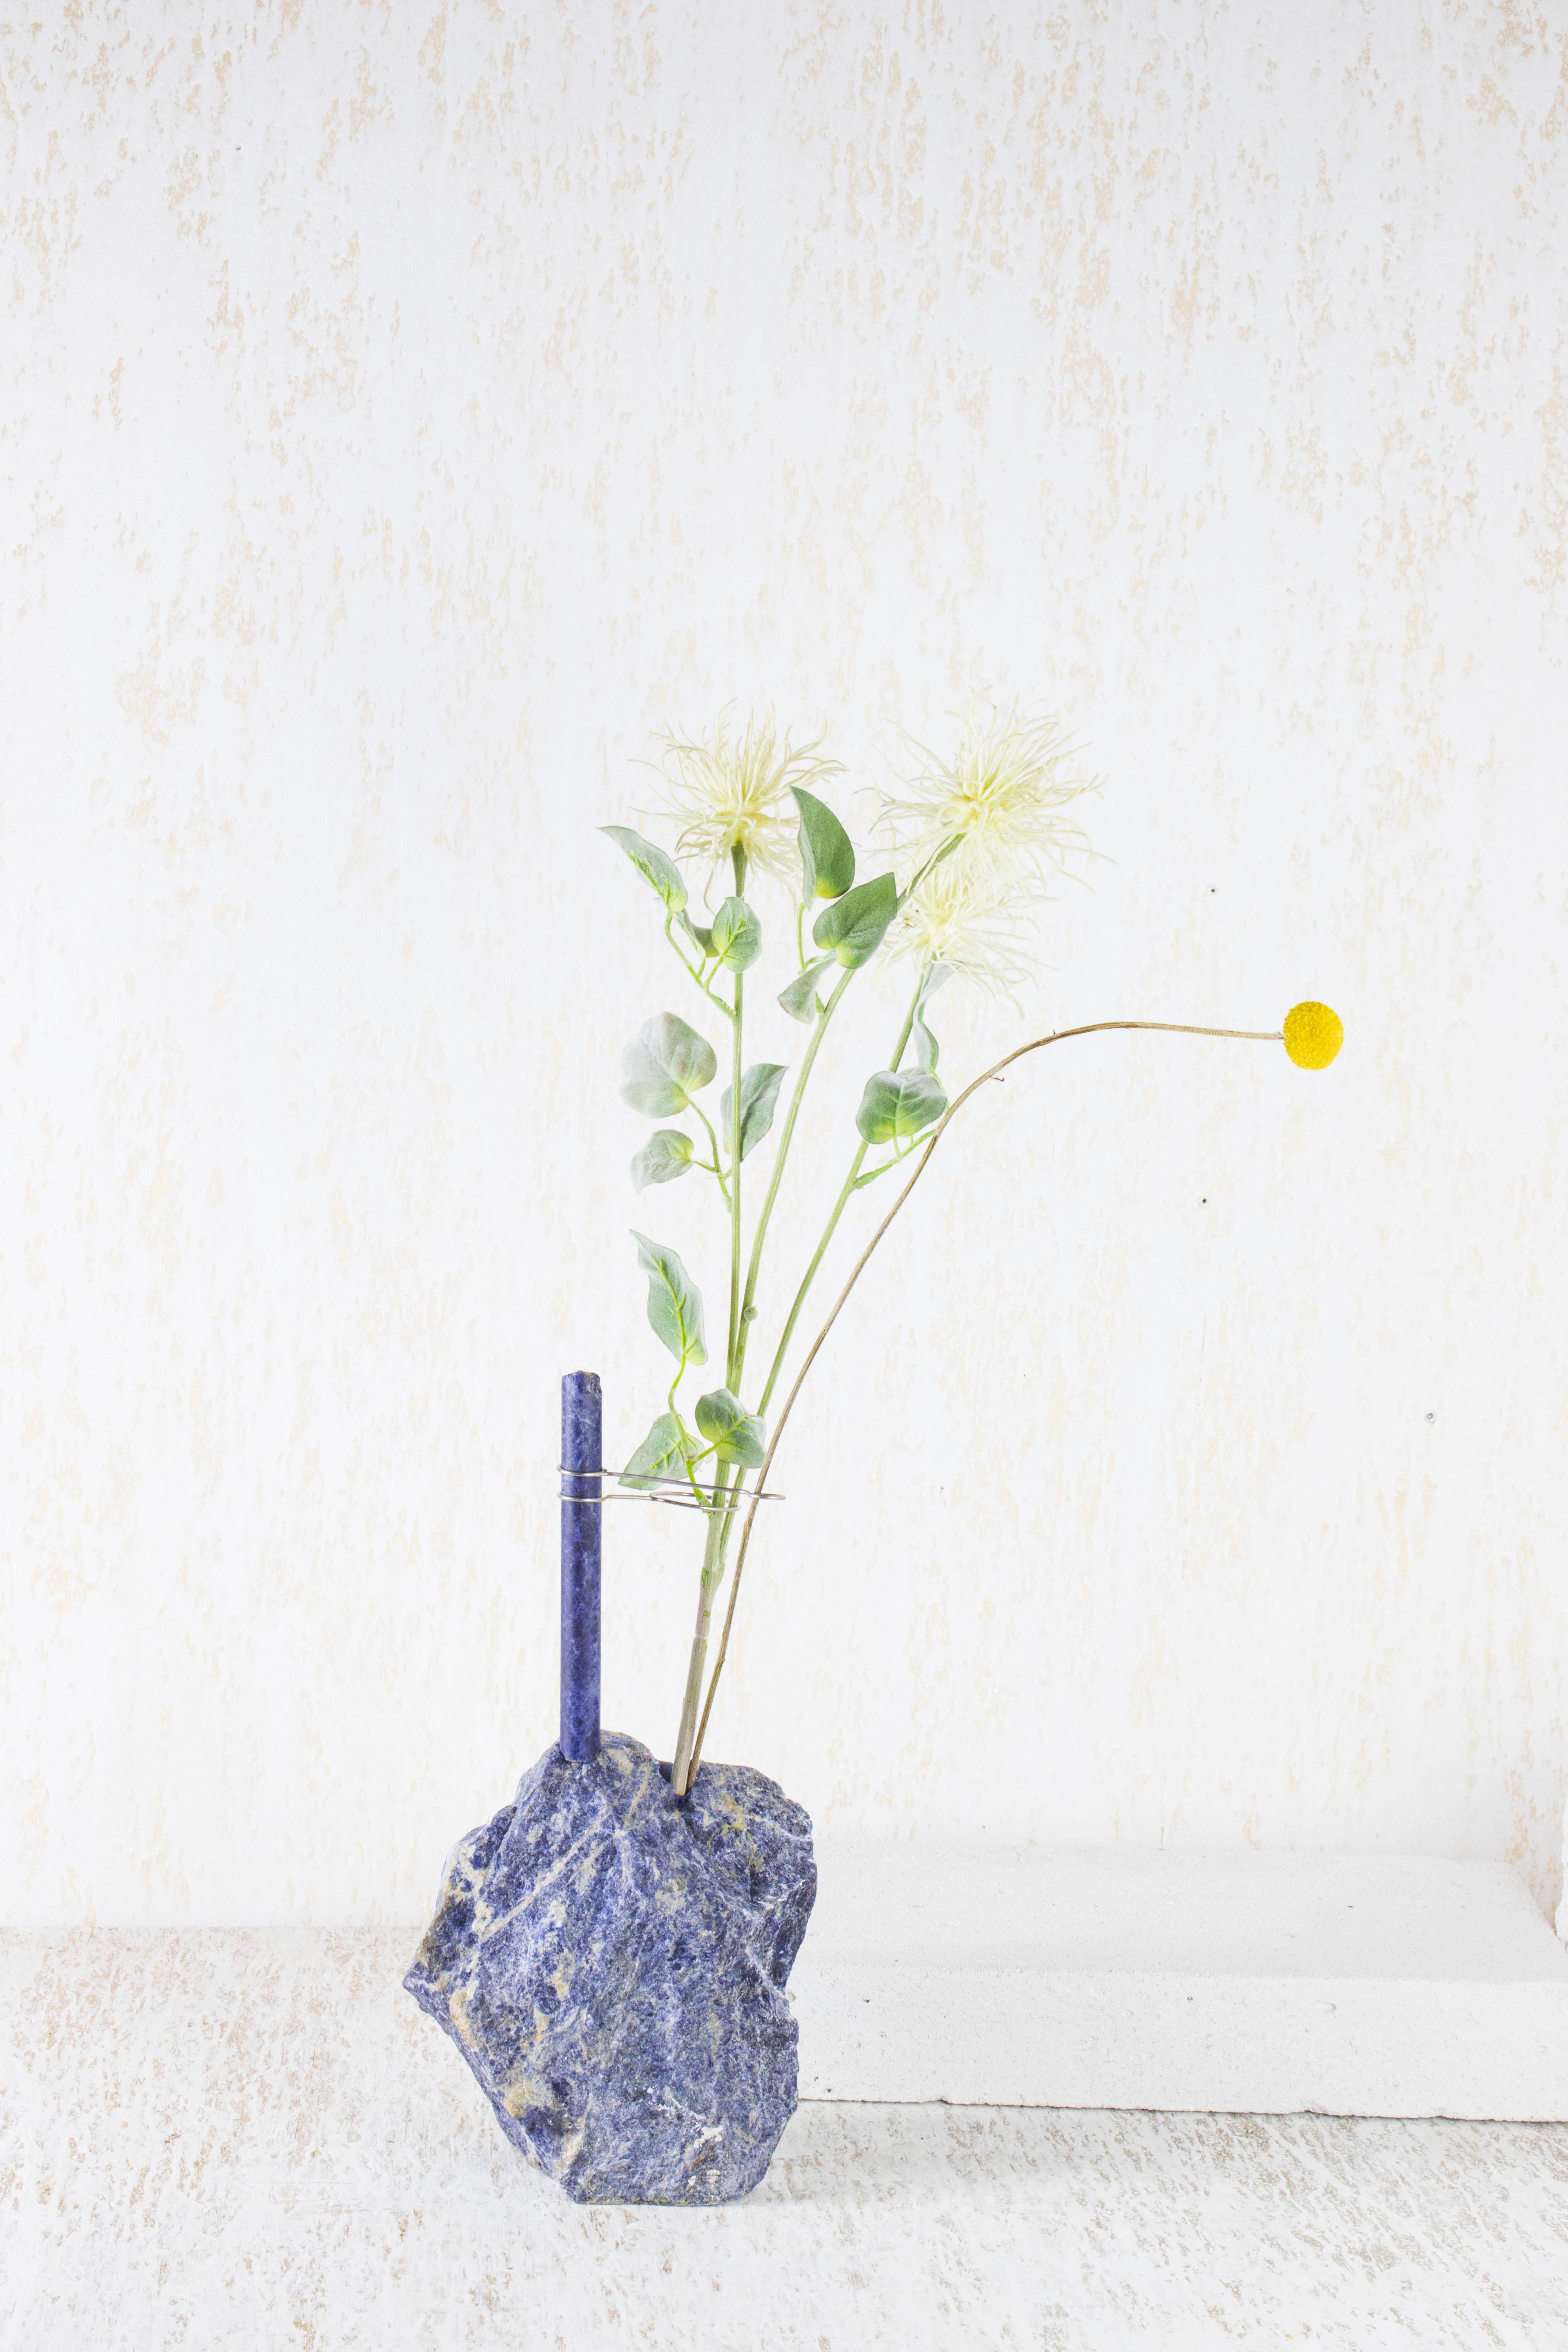 Small Sodalite Flower Vessel by Studio DO
Dimensions: D 20 x W 8 x H 36 cm
Materials: Sodalite, stainless steel.
4.5 kg.

Flowers are intrinsically connected with composition and earth.
Influenced by varied vessels from past to present such as the